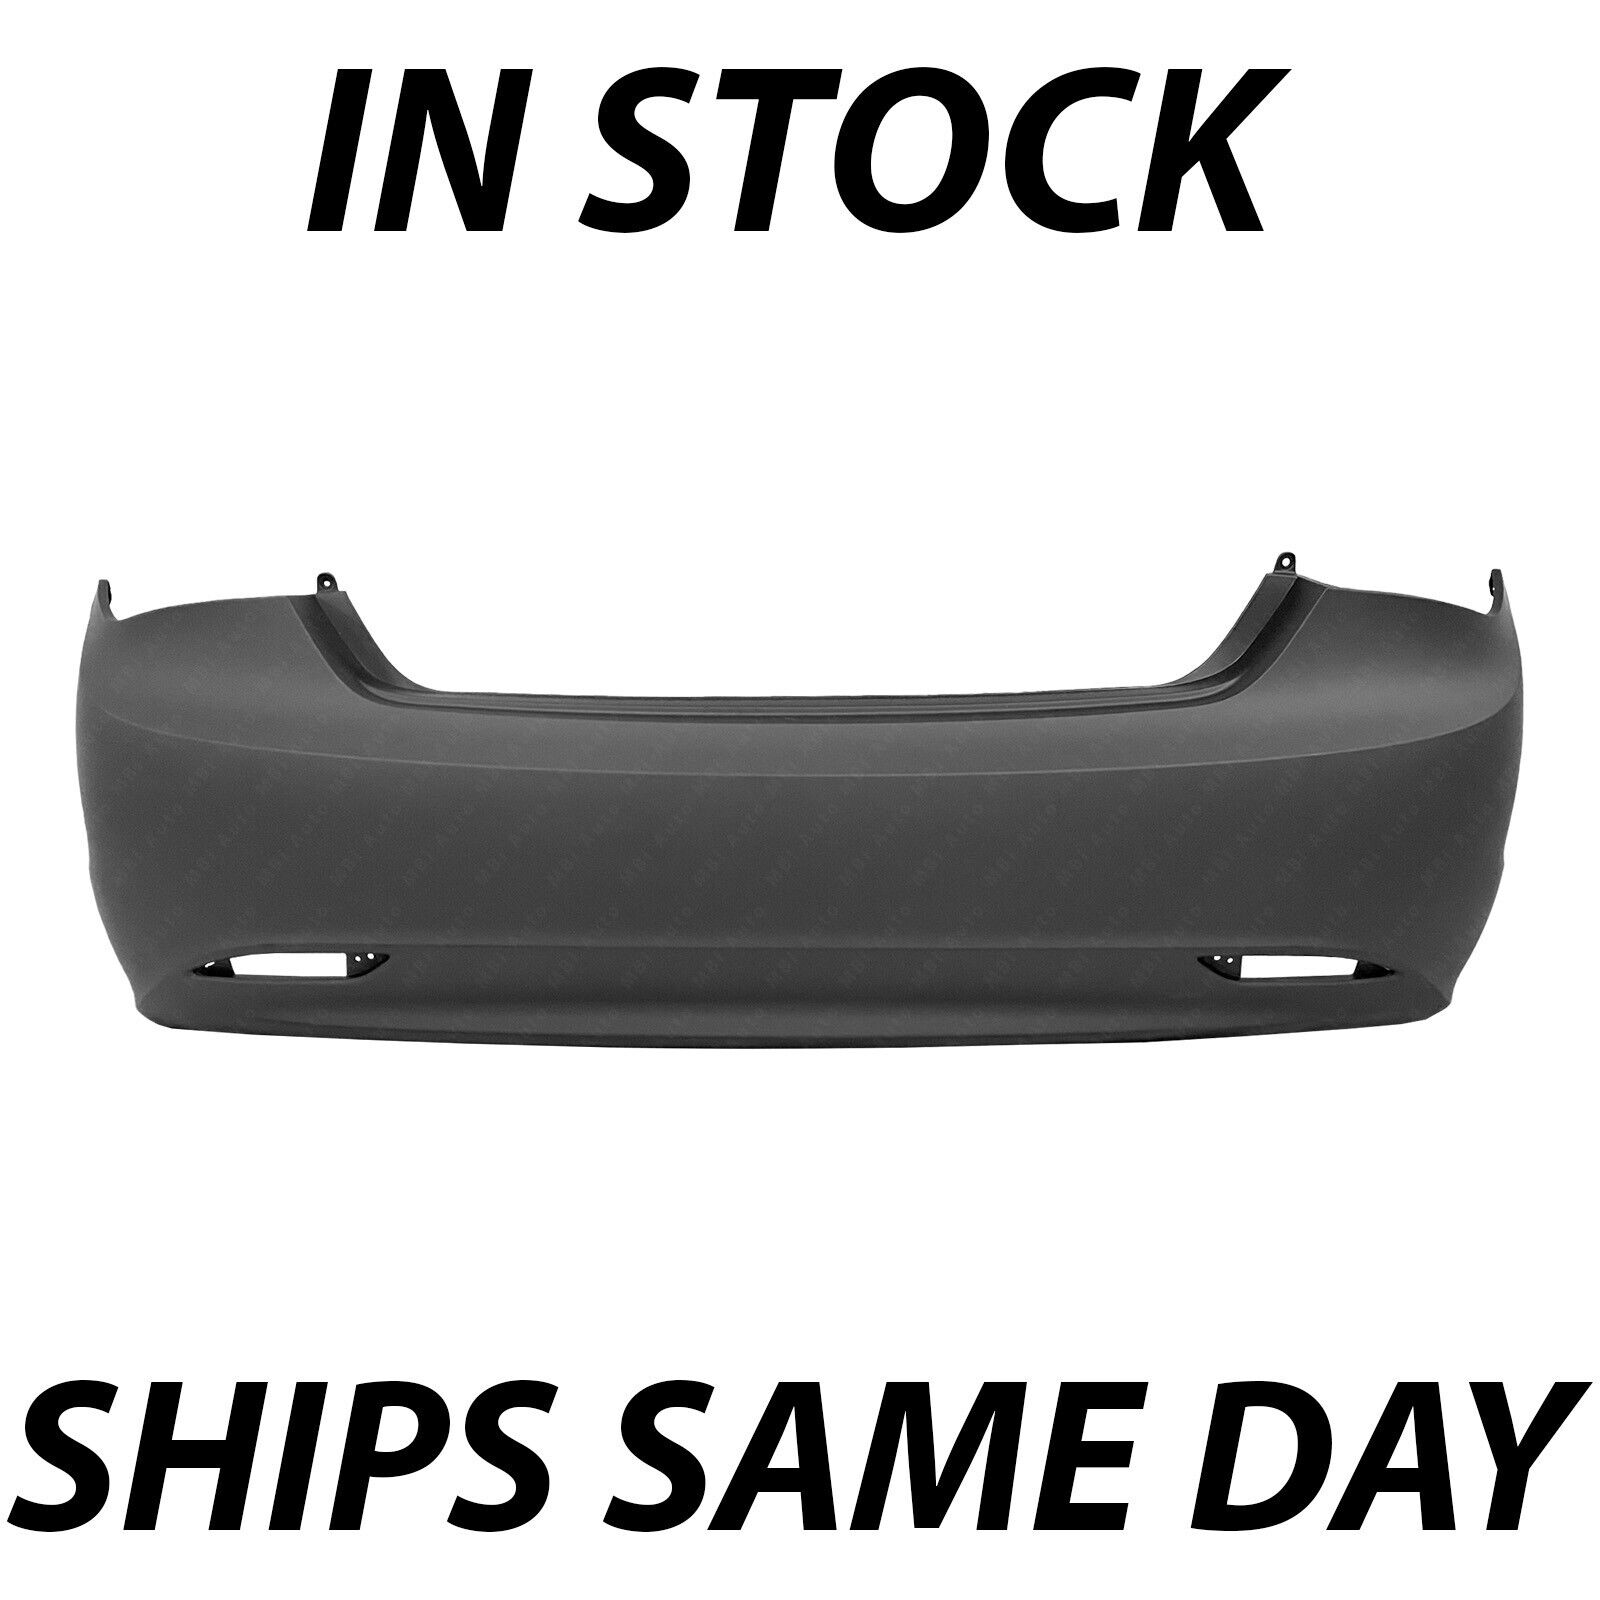 NEW Primered - Rear Bumper Cover Replacement for 2011-2013 Hyundai Sonata 11-13